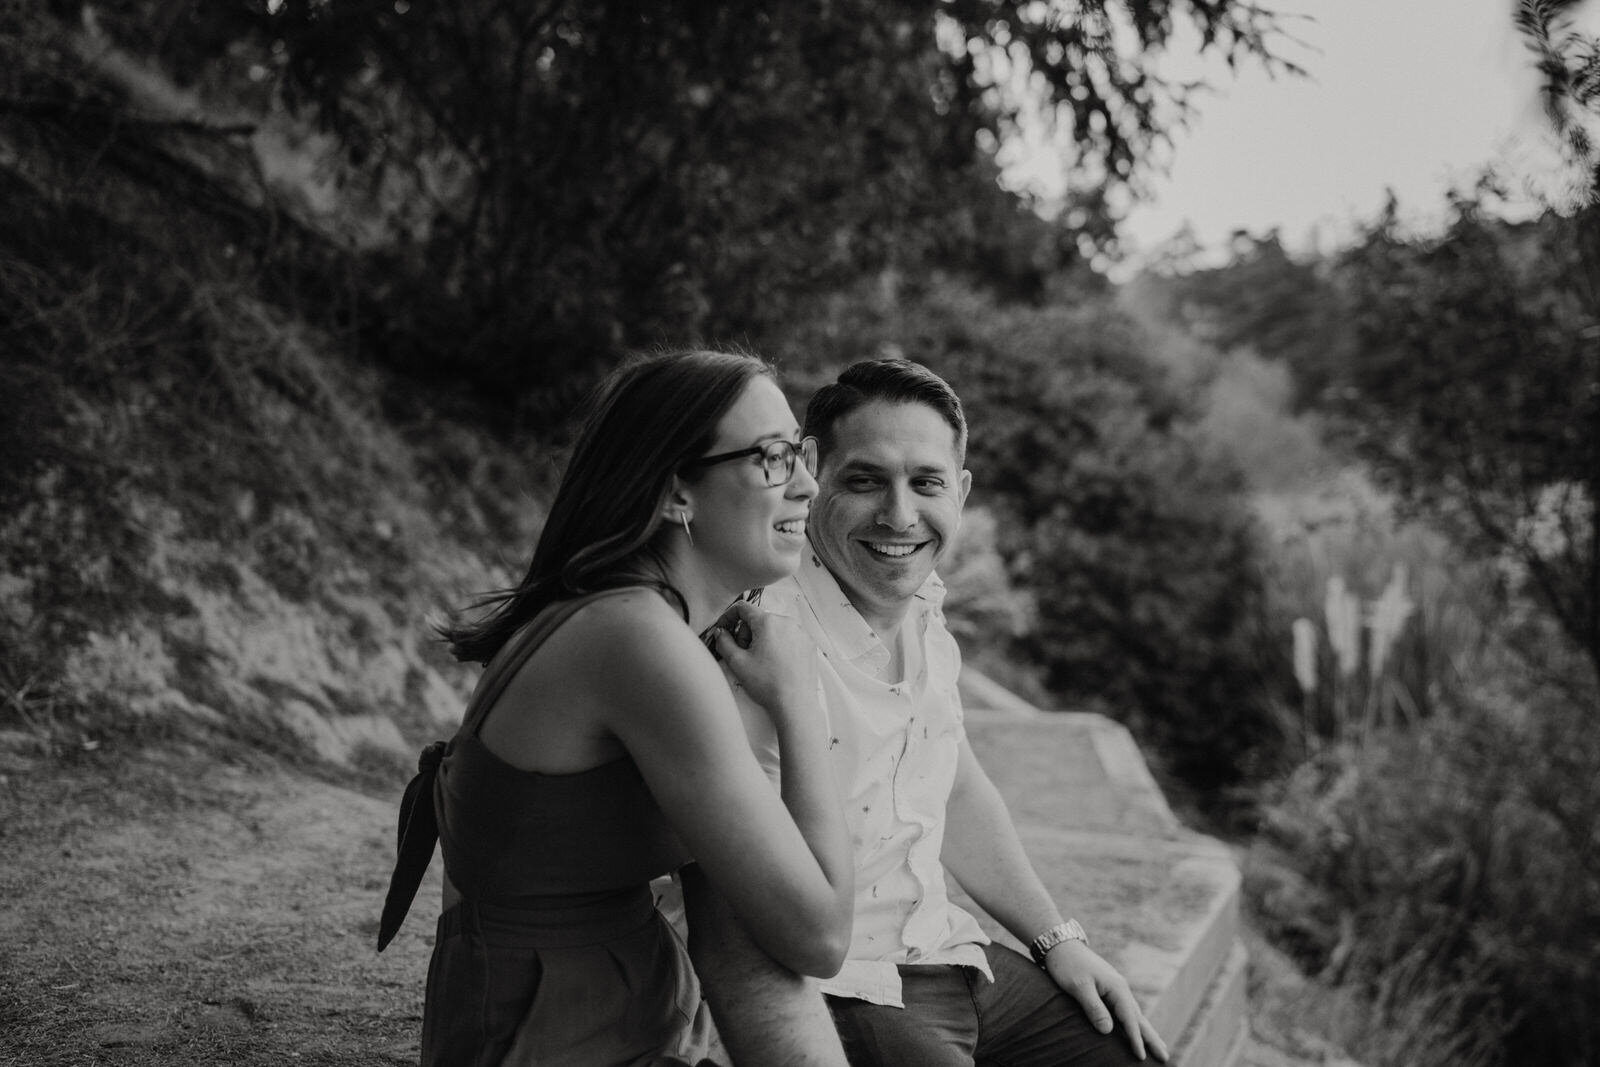 Happy engagement photos at Franklin Canyon Park